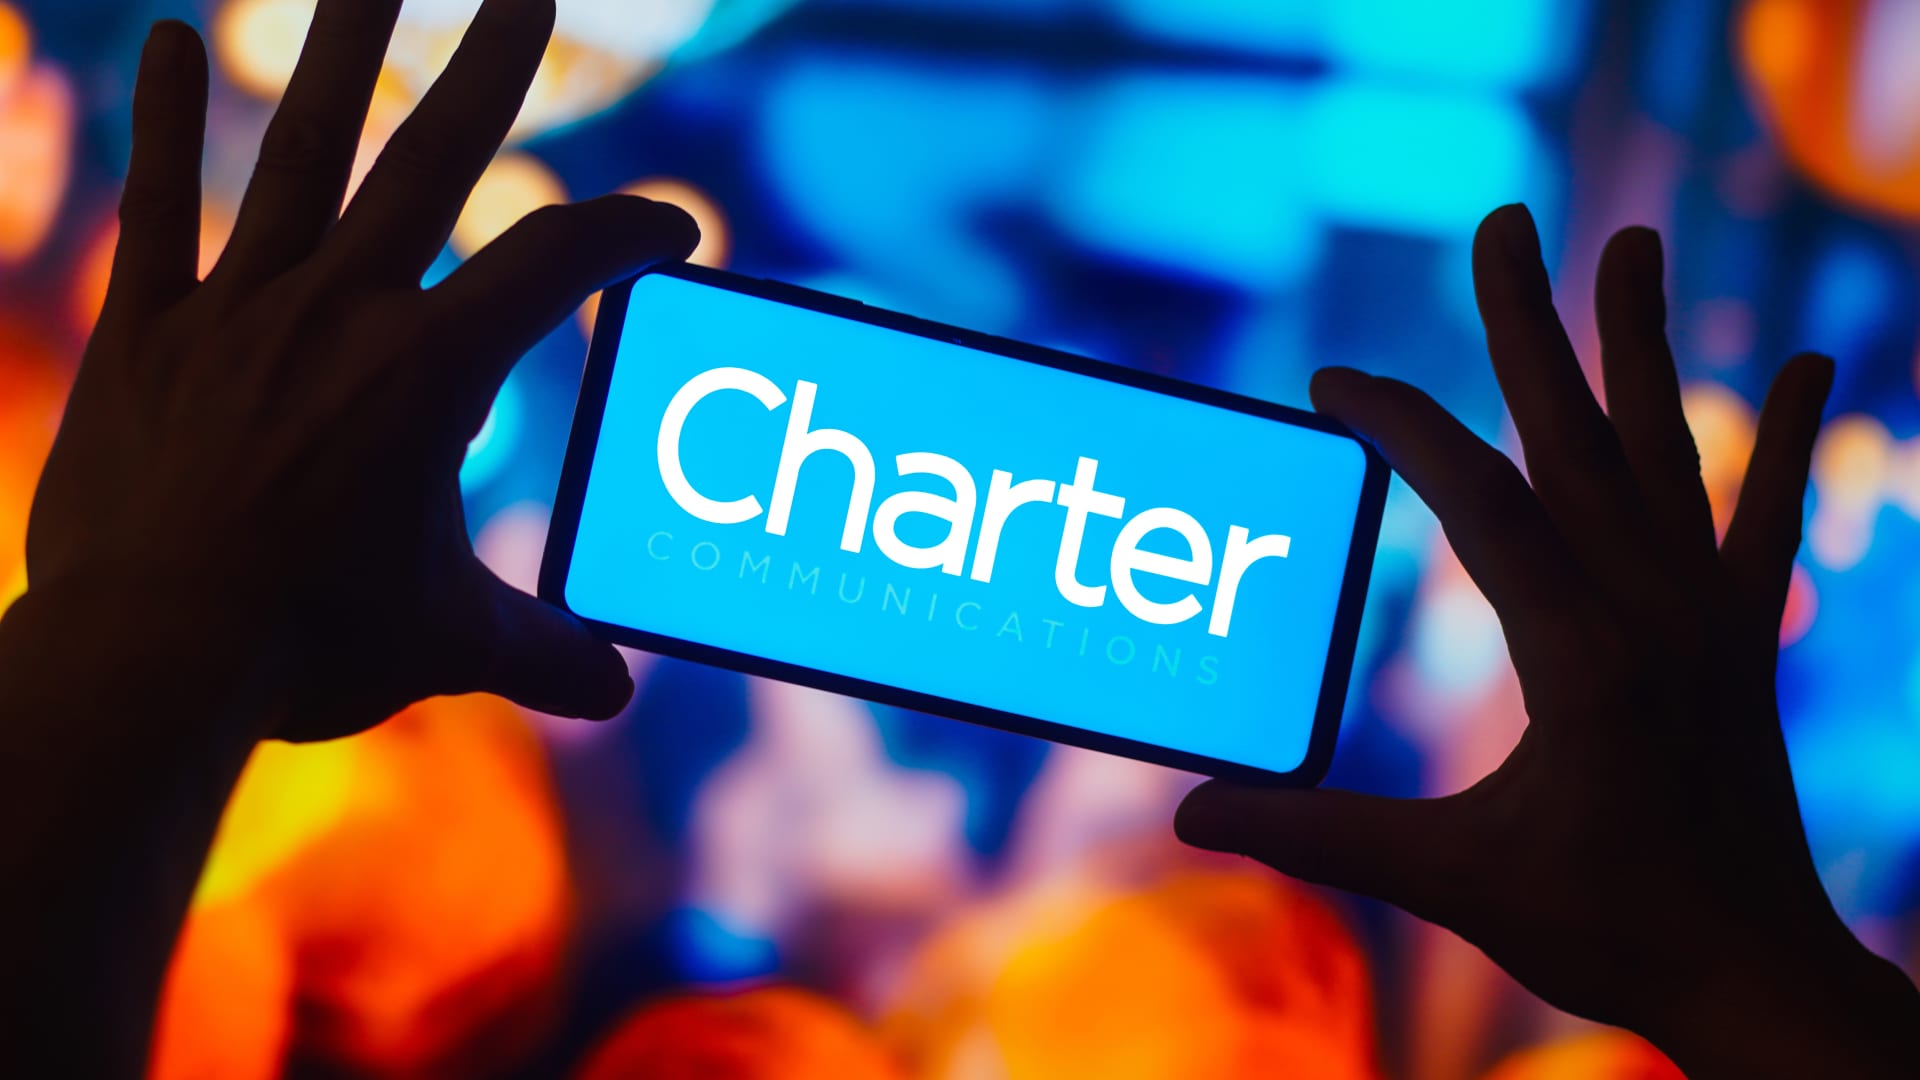 Charter will offer a cheaper sports lite cable TV option